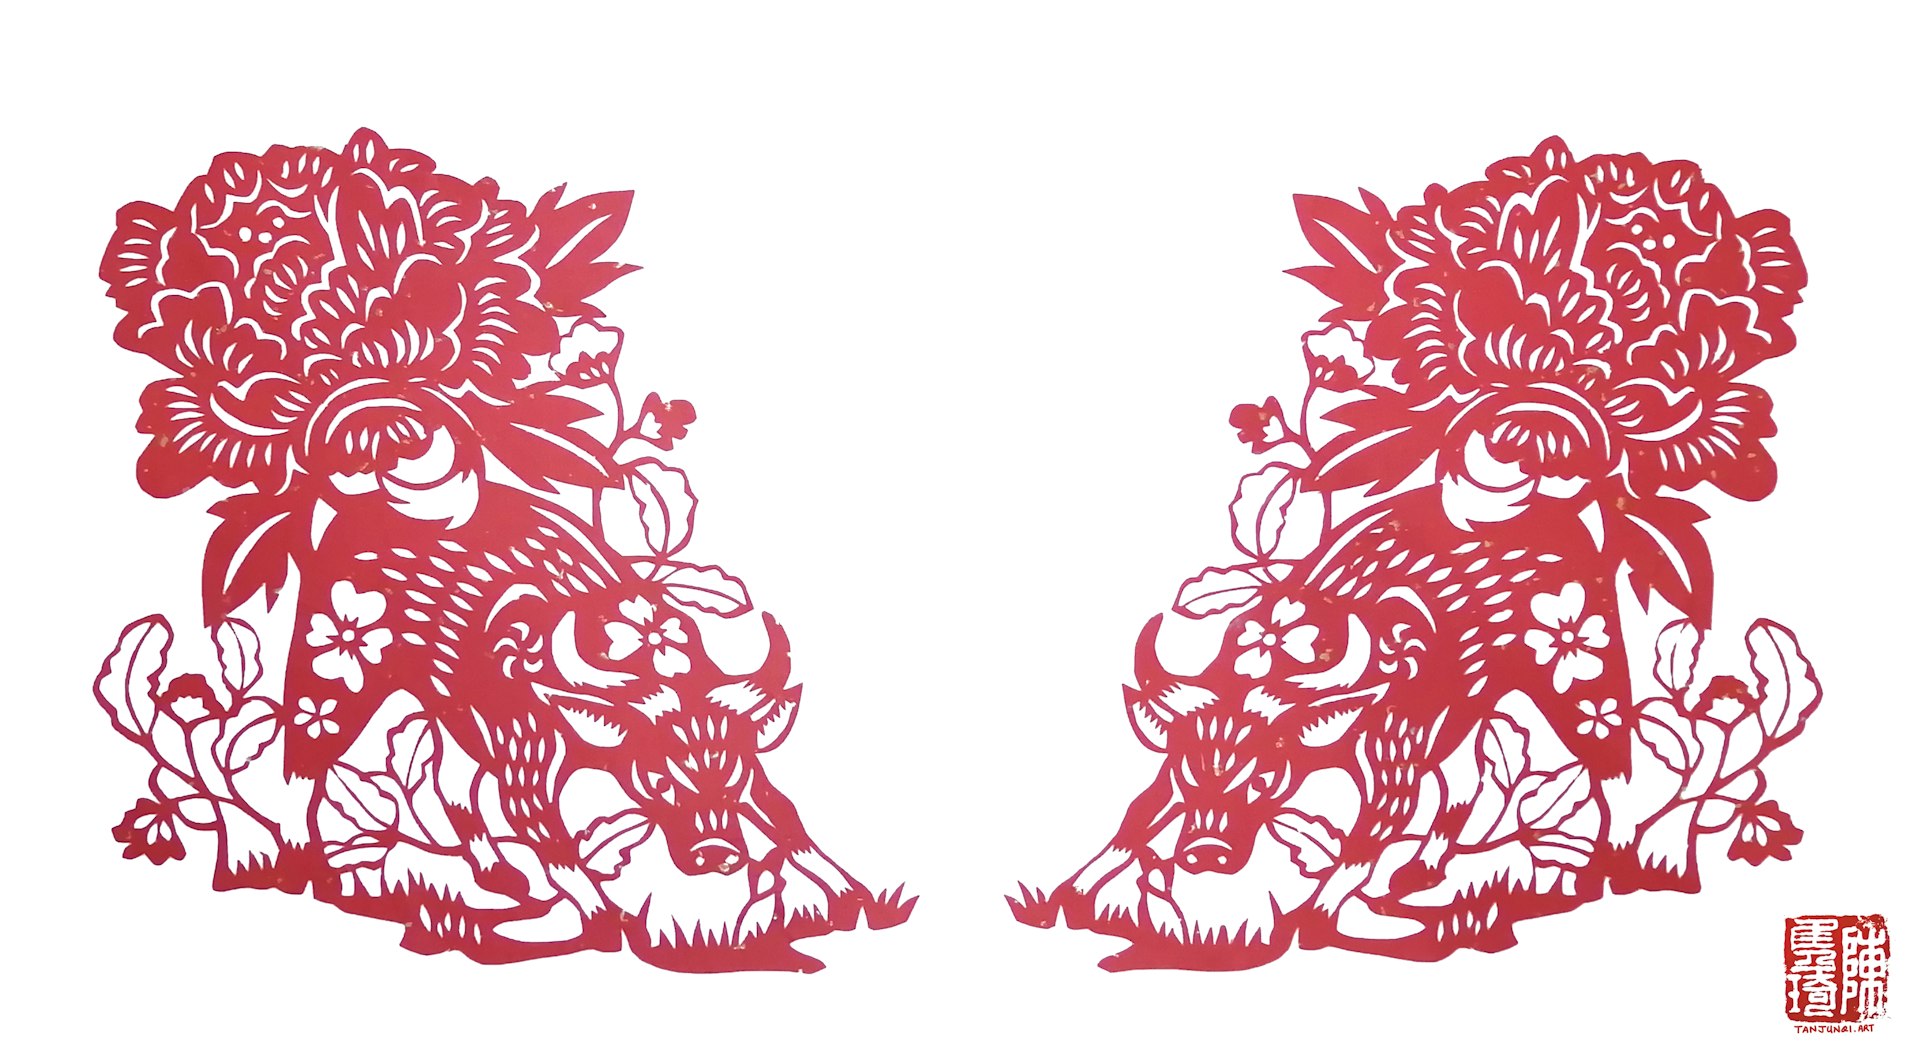 Pair of mirror-image Chinese papercuts, each showing a bull in charging position, with a huge peony blossoming above their arched backs.